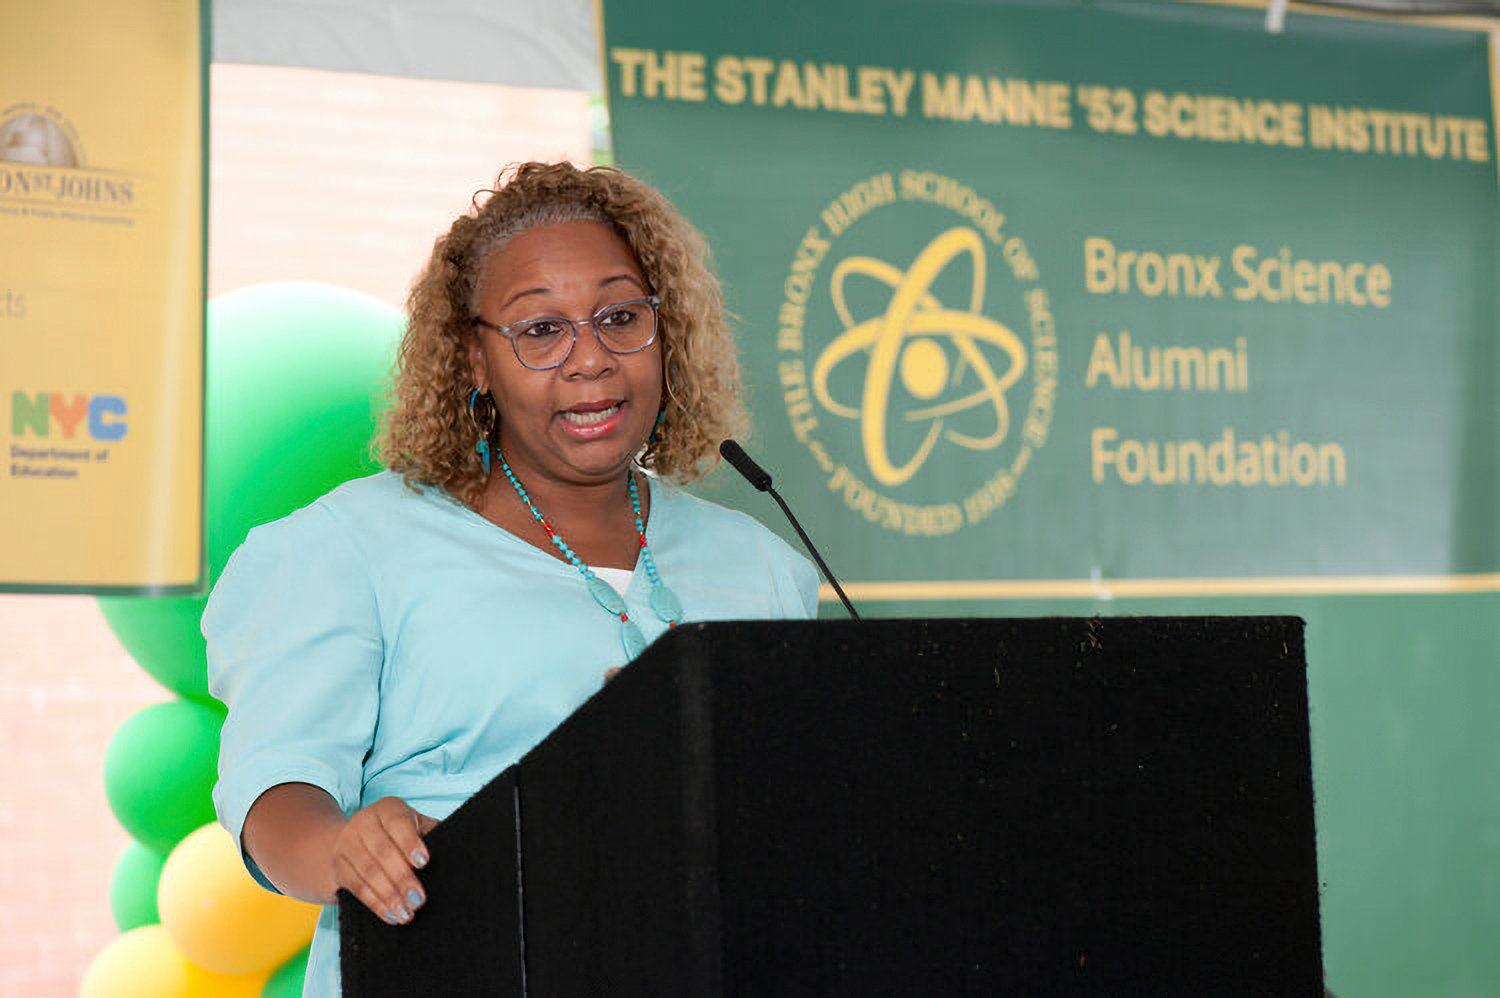 City school’s chancellor Meisha Porter speaks at the groundbreaking ceremony last month for a new research institute on the Bronx Science named after a 1952 graduate of the school, Stanley Manne.